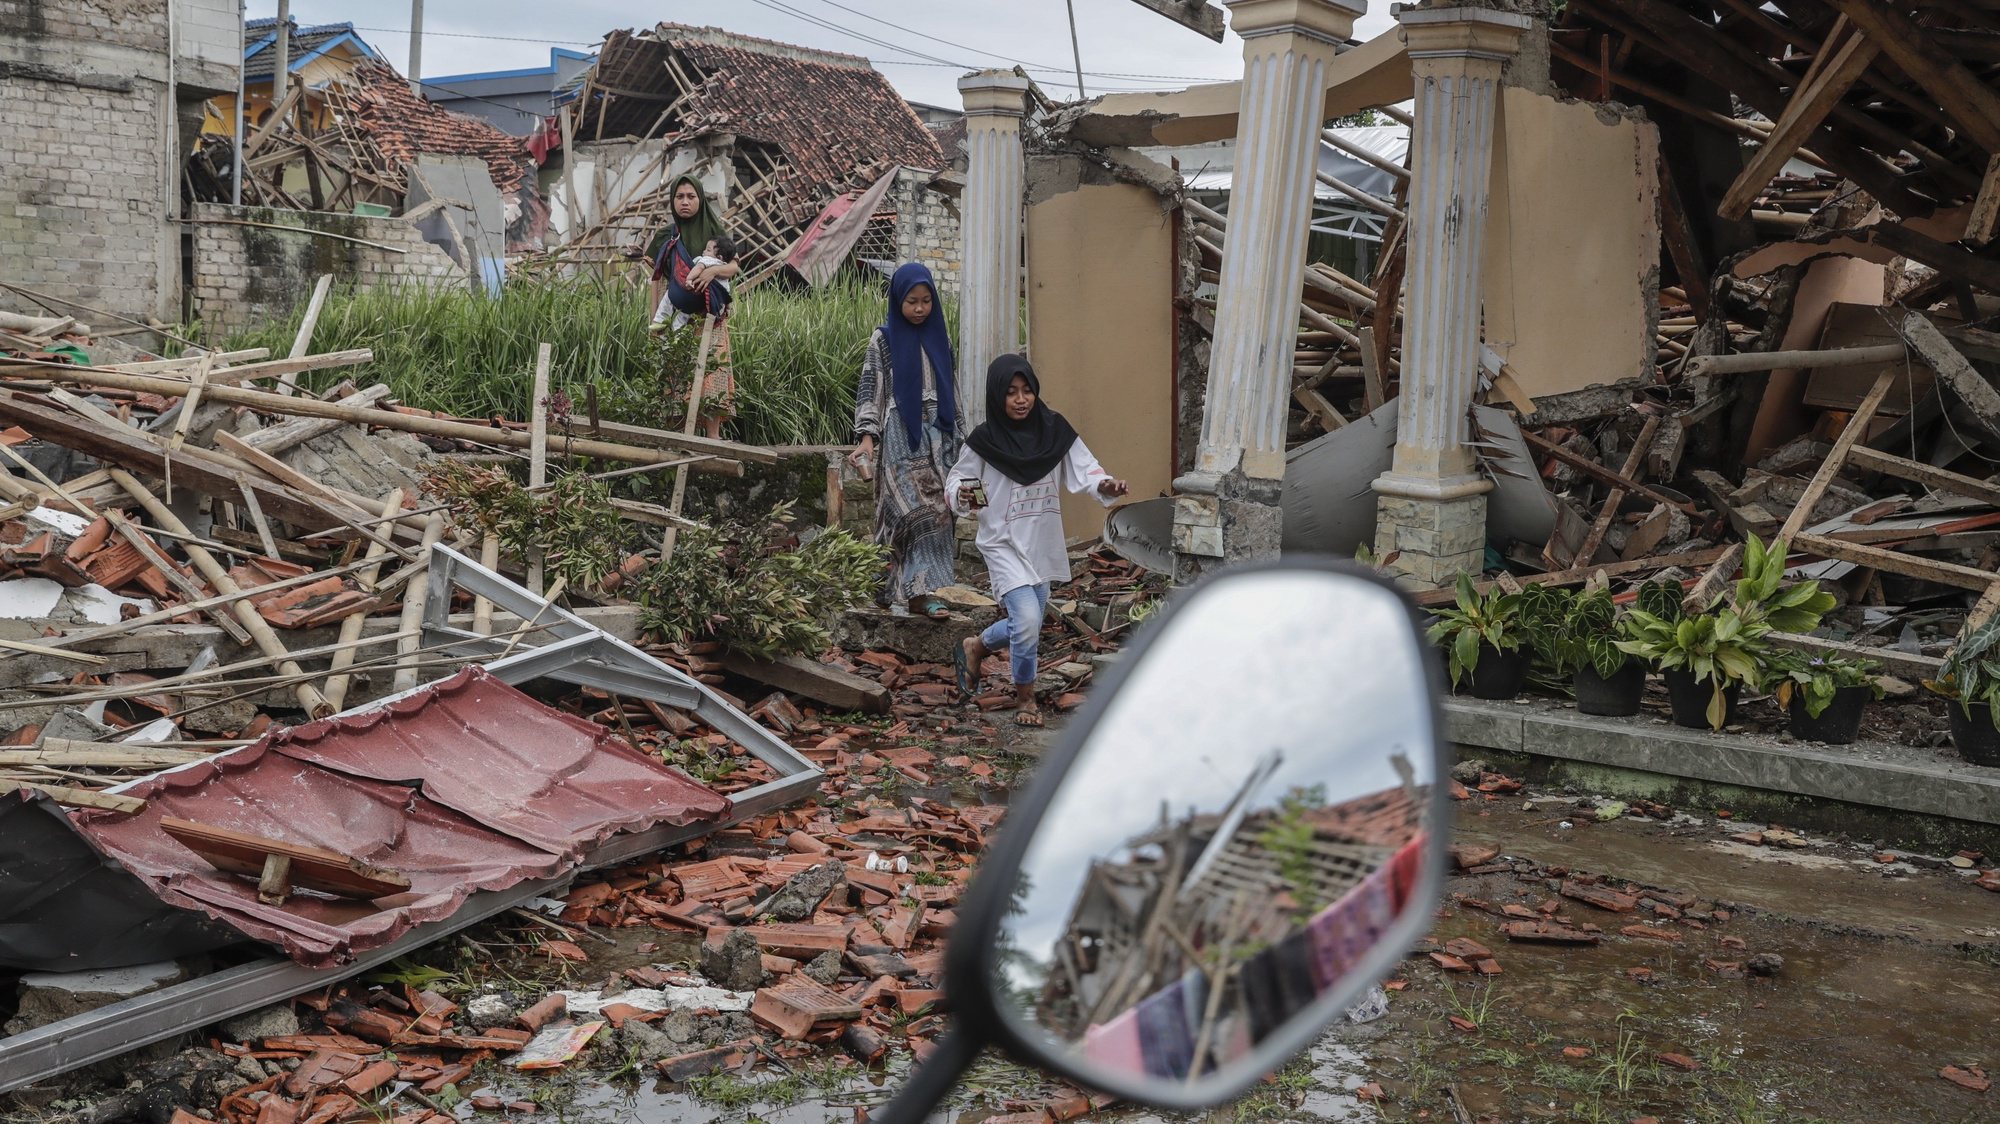 epa10326707 People walk near collapsed houses affected by the 5.6 magnitude earthquake in Cianjur, Indonesia, 25 November 2022. According to the National Disaster Management Authority (BNPB), at least 272 people killed after 5.6 magnitude earthquake hit southwest of Cianjur, West Java on 21 November 2022.  EPA/MAST IRHAM